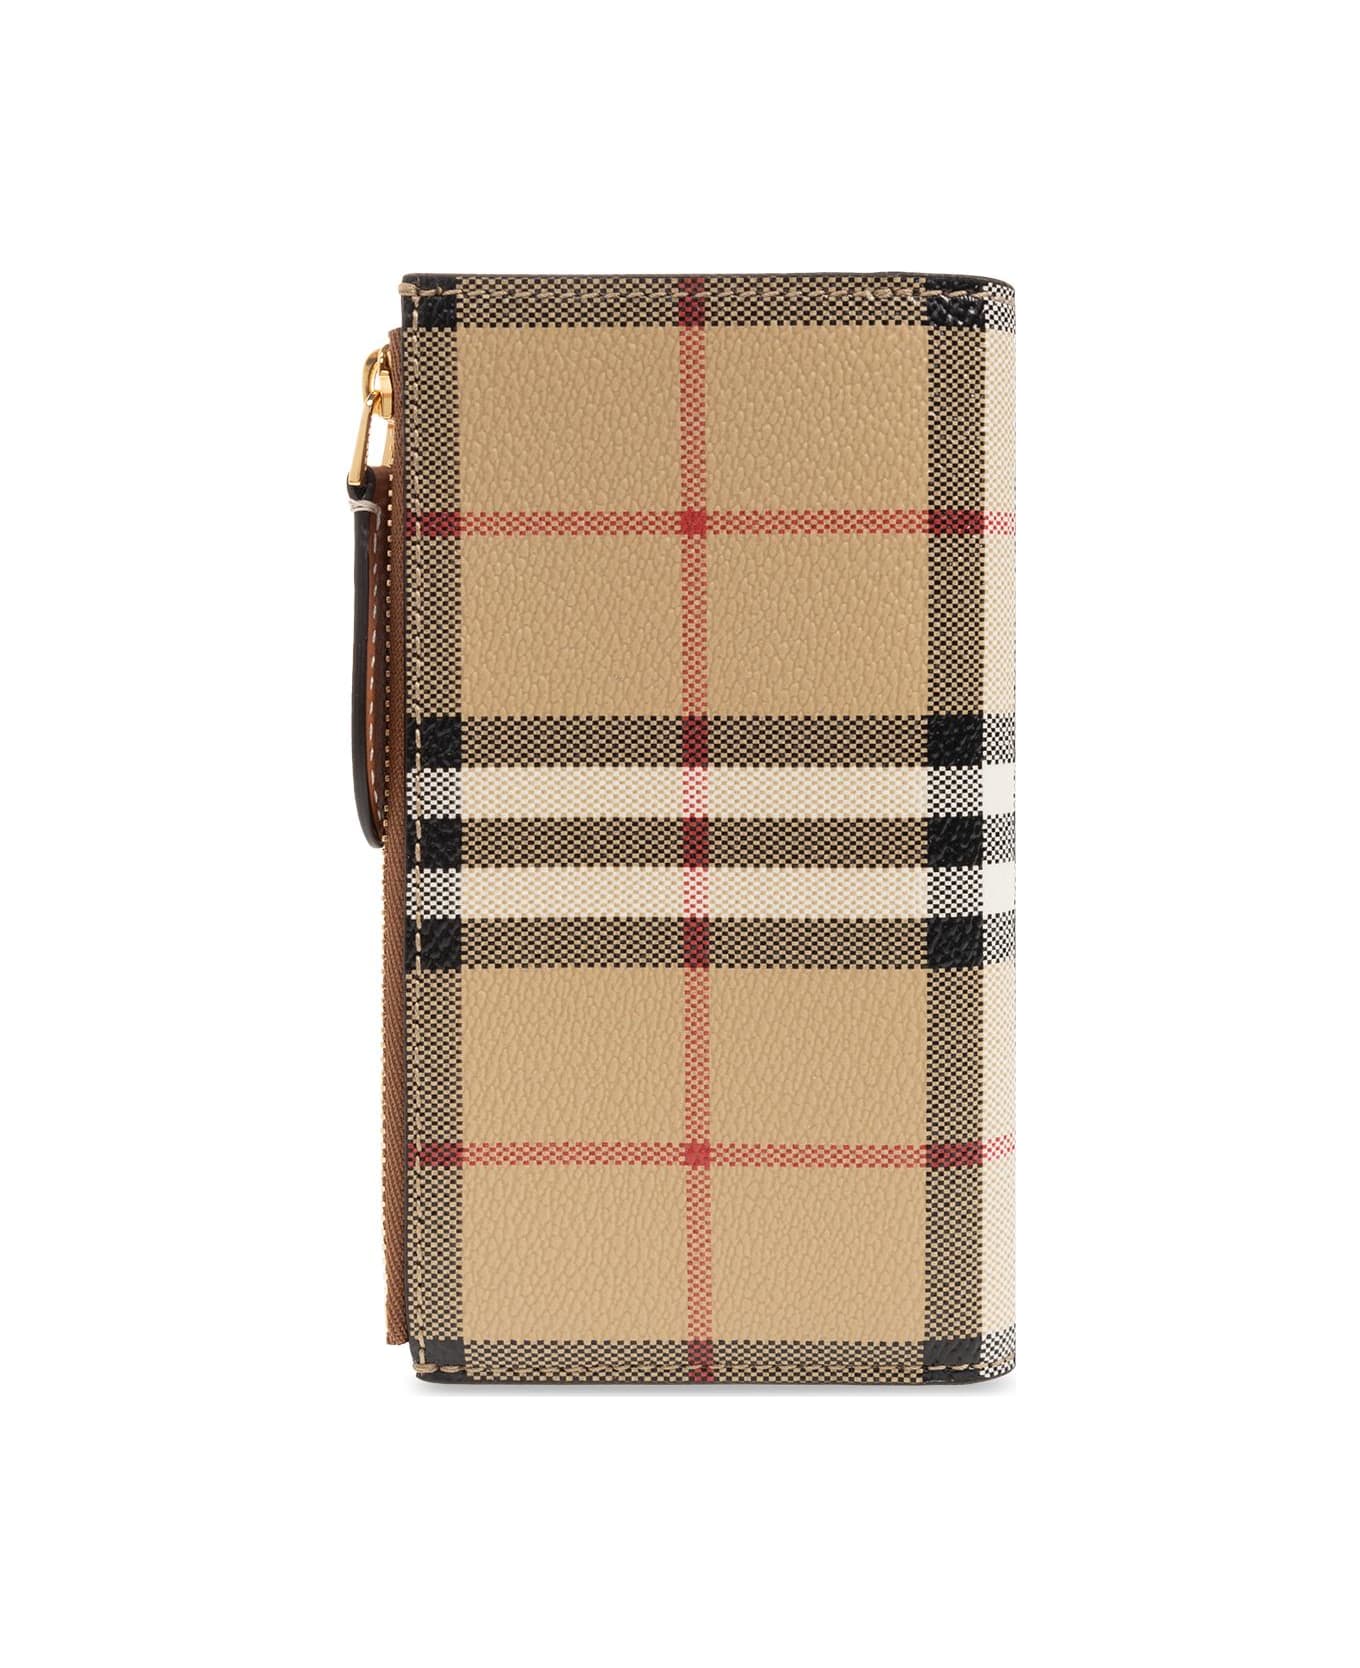 Burberry Checked Wallet - Archive Beige